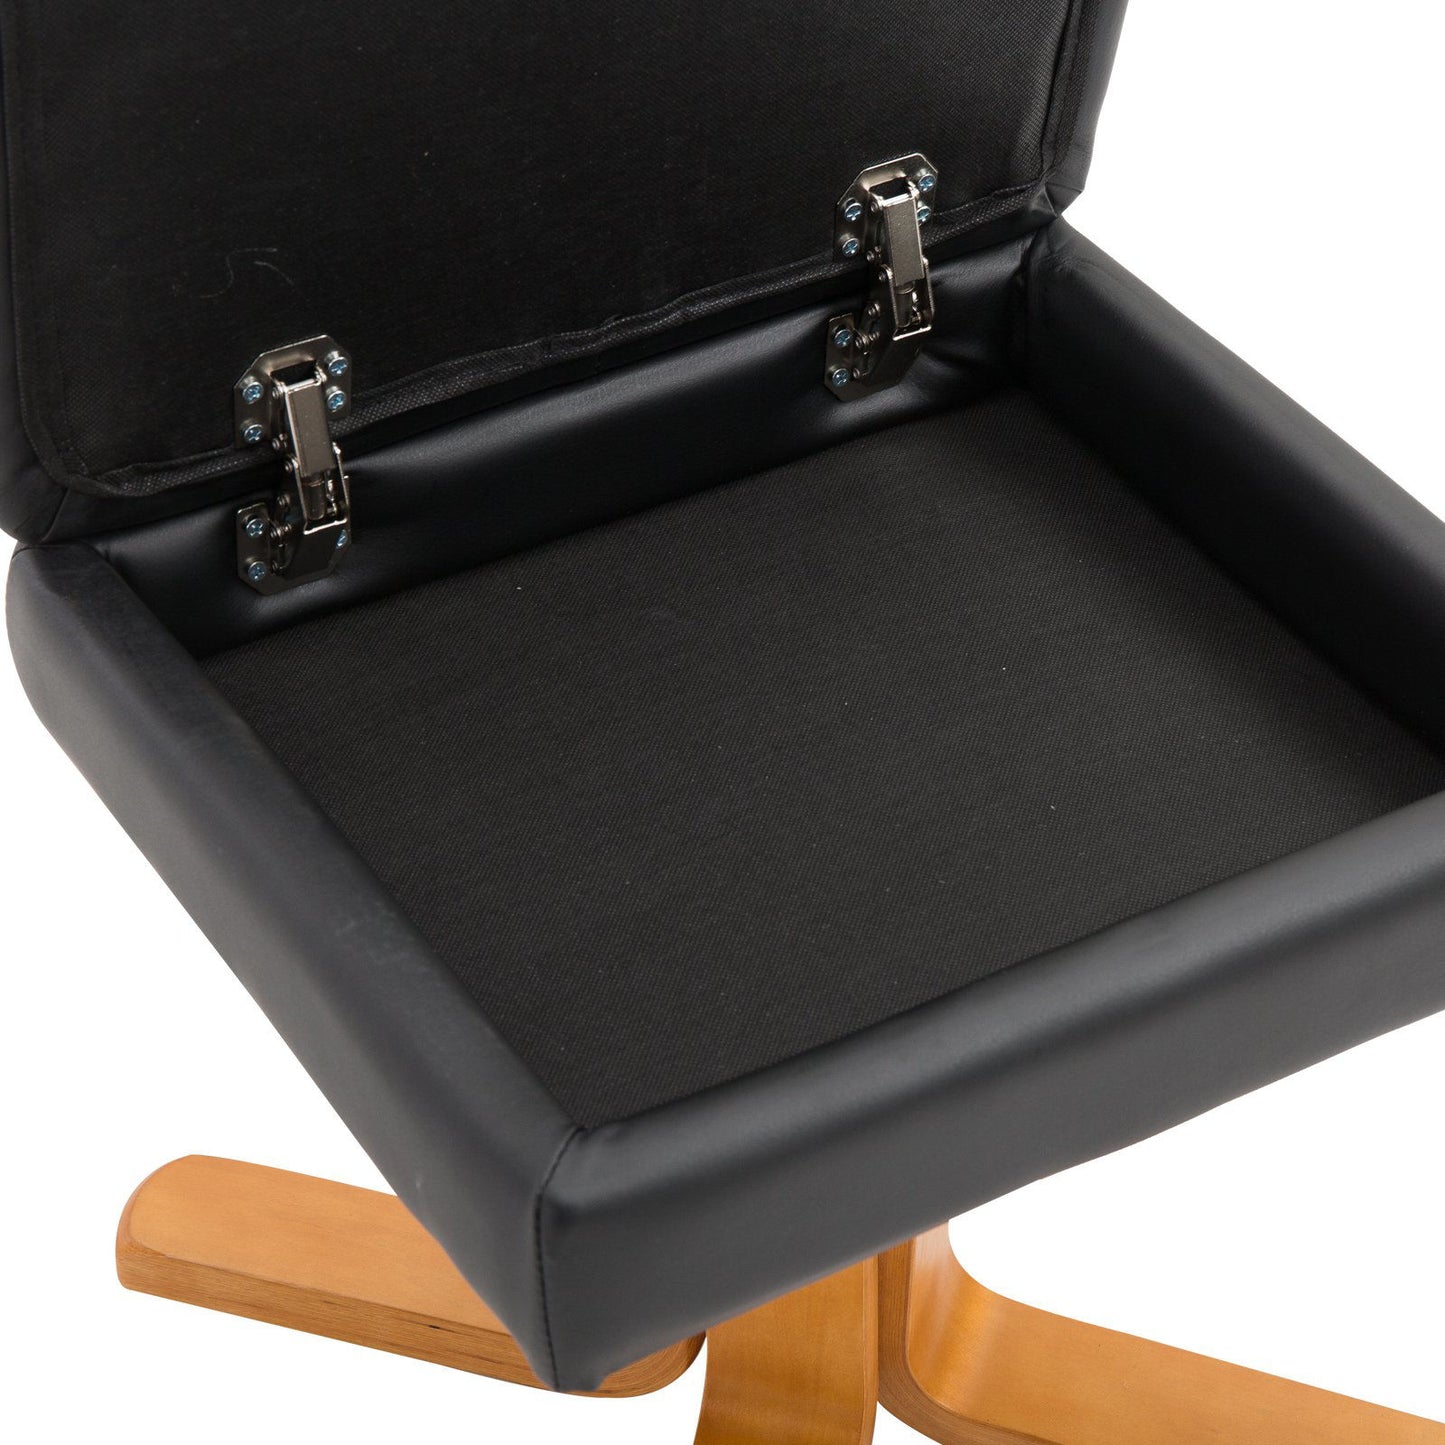 Nancy's Richmond Relax armchair - Footrest - Footstool - Faux leather - Solid Wood - Reclining function - 80 x 86 x 99 cm - Black